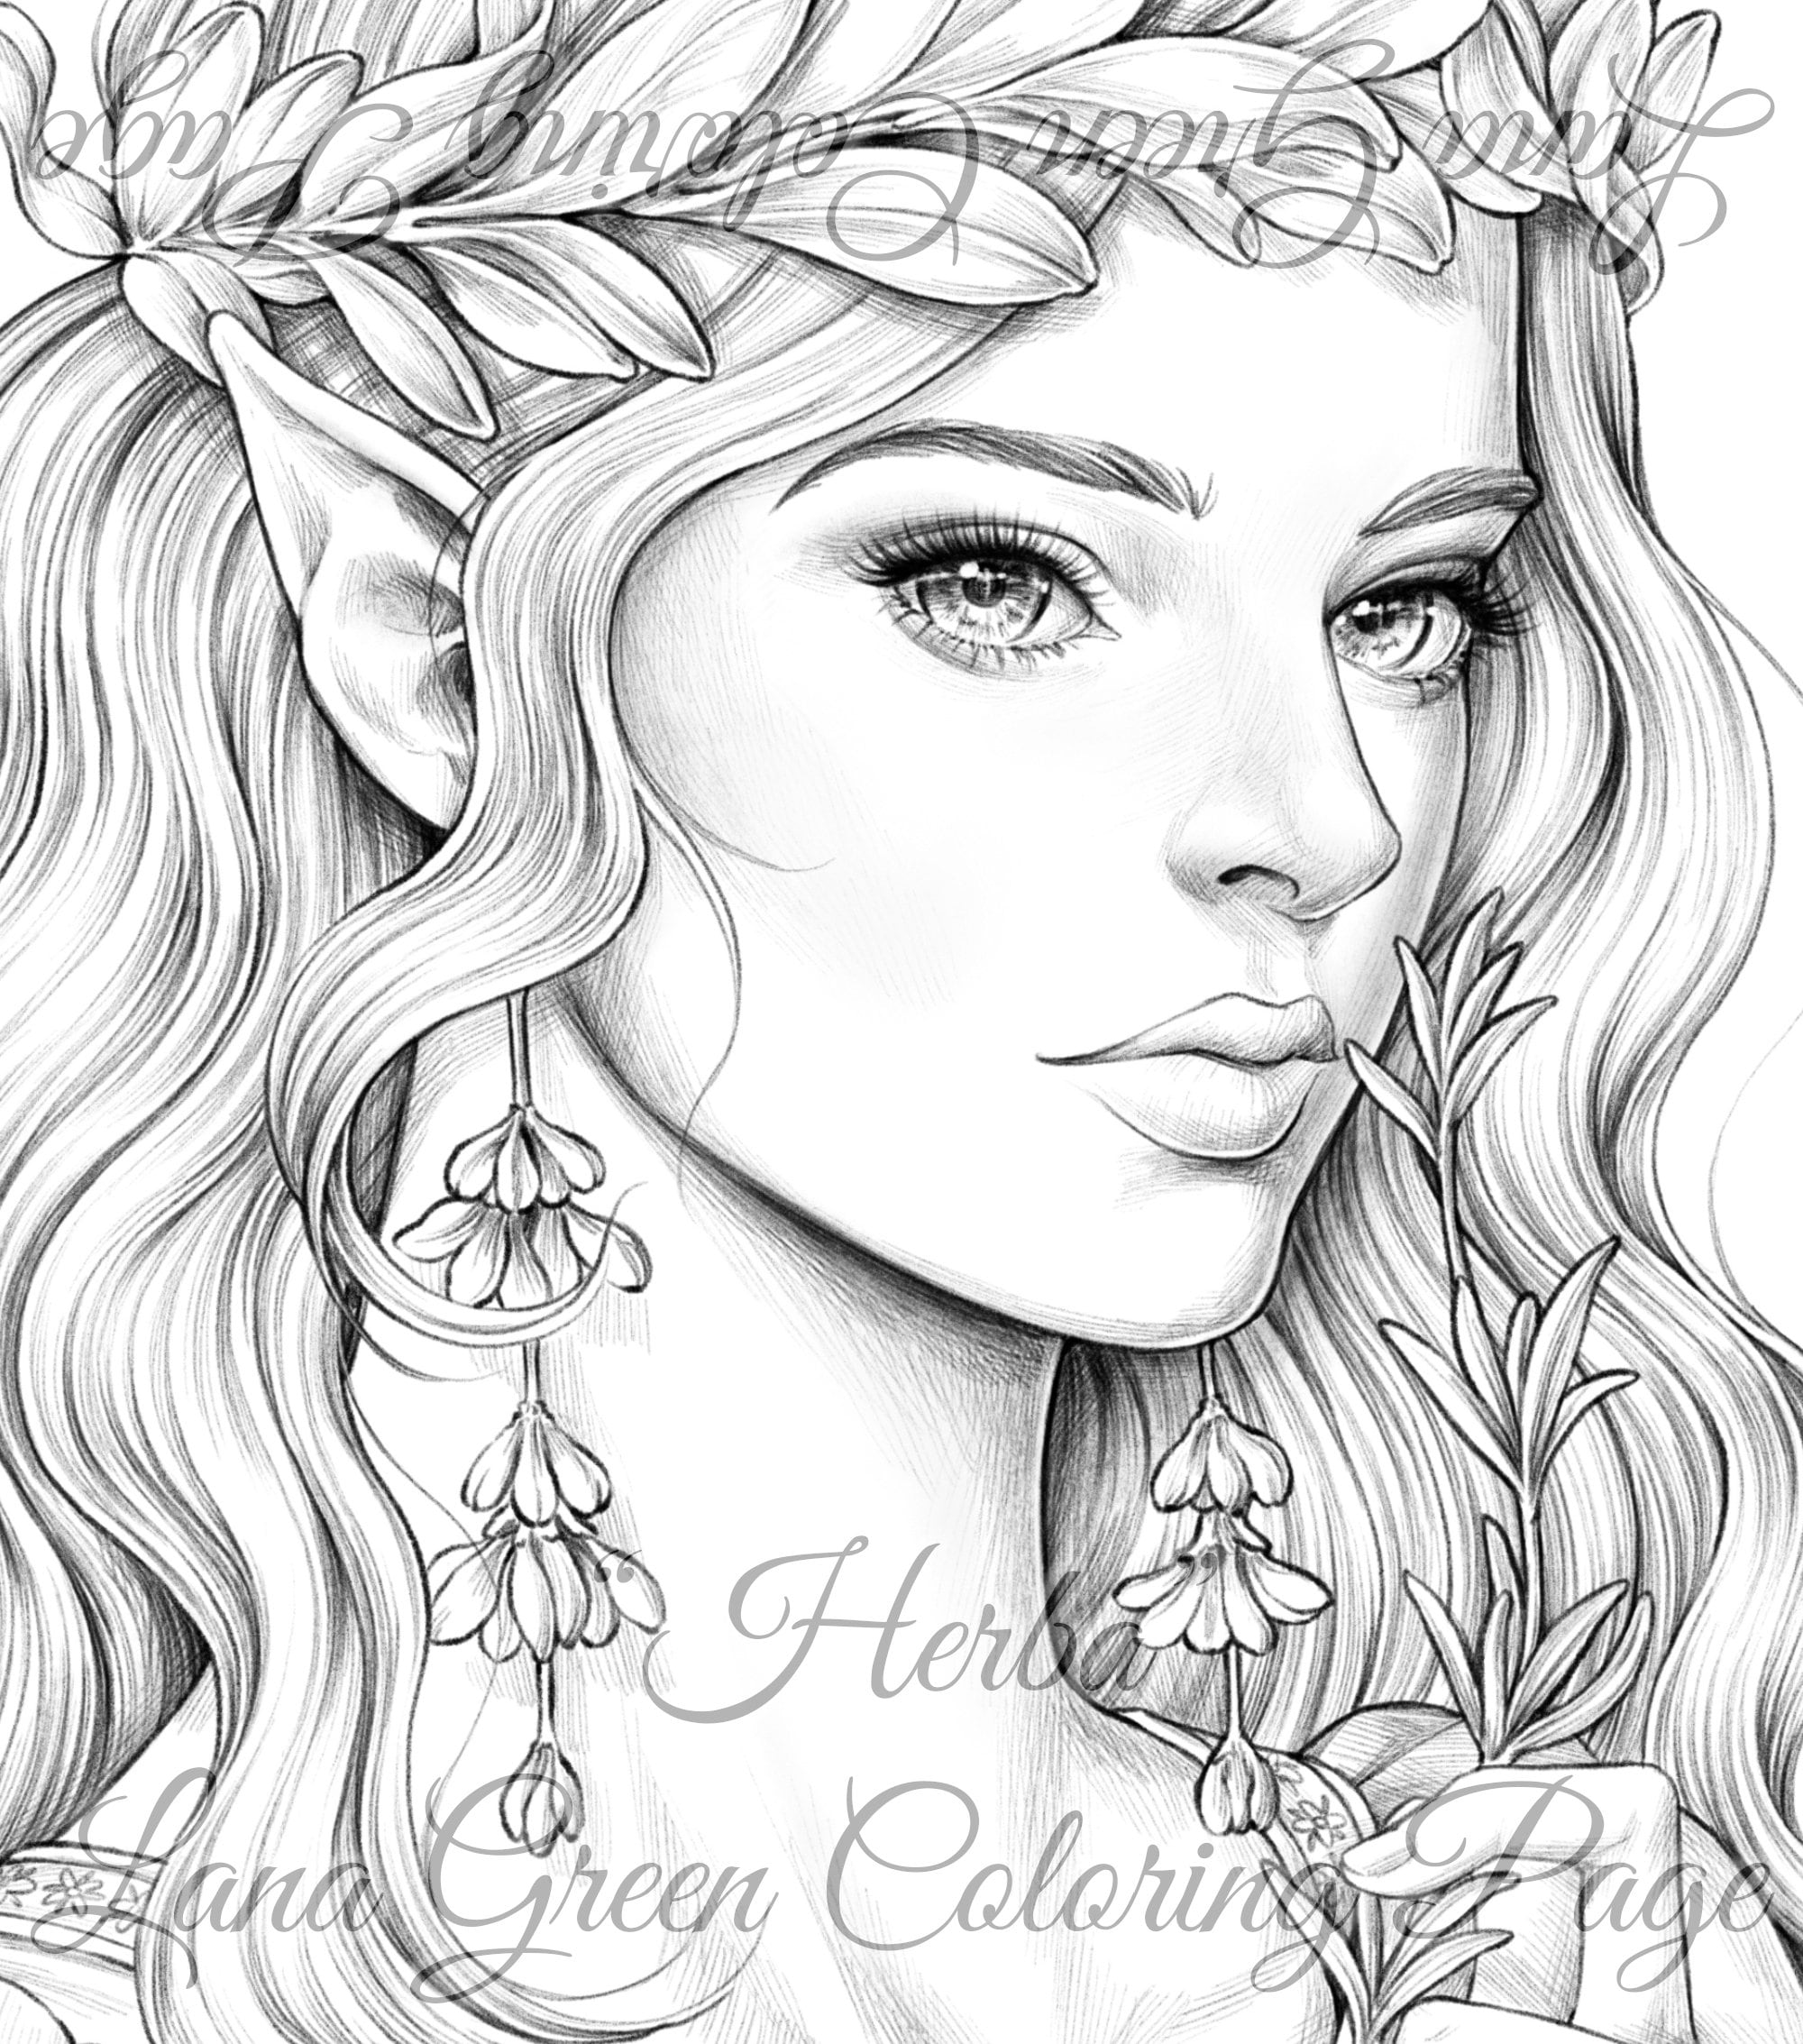 Herba Coloring Page for Adults Grayscale Coloring Page Instant Download  Lana Green Art JPEG, PDF -  Norway